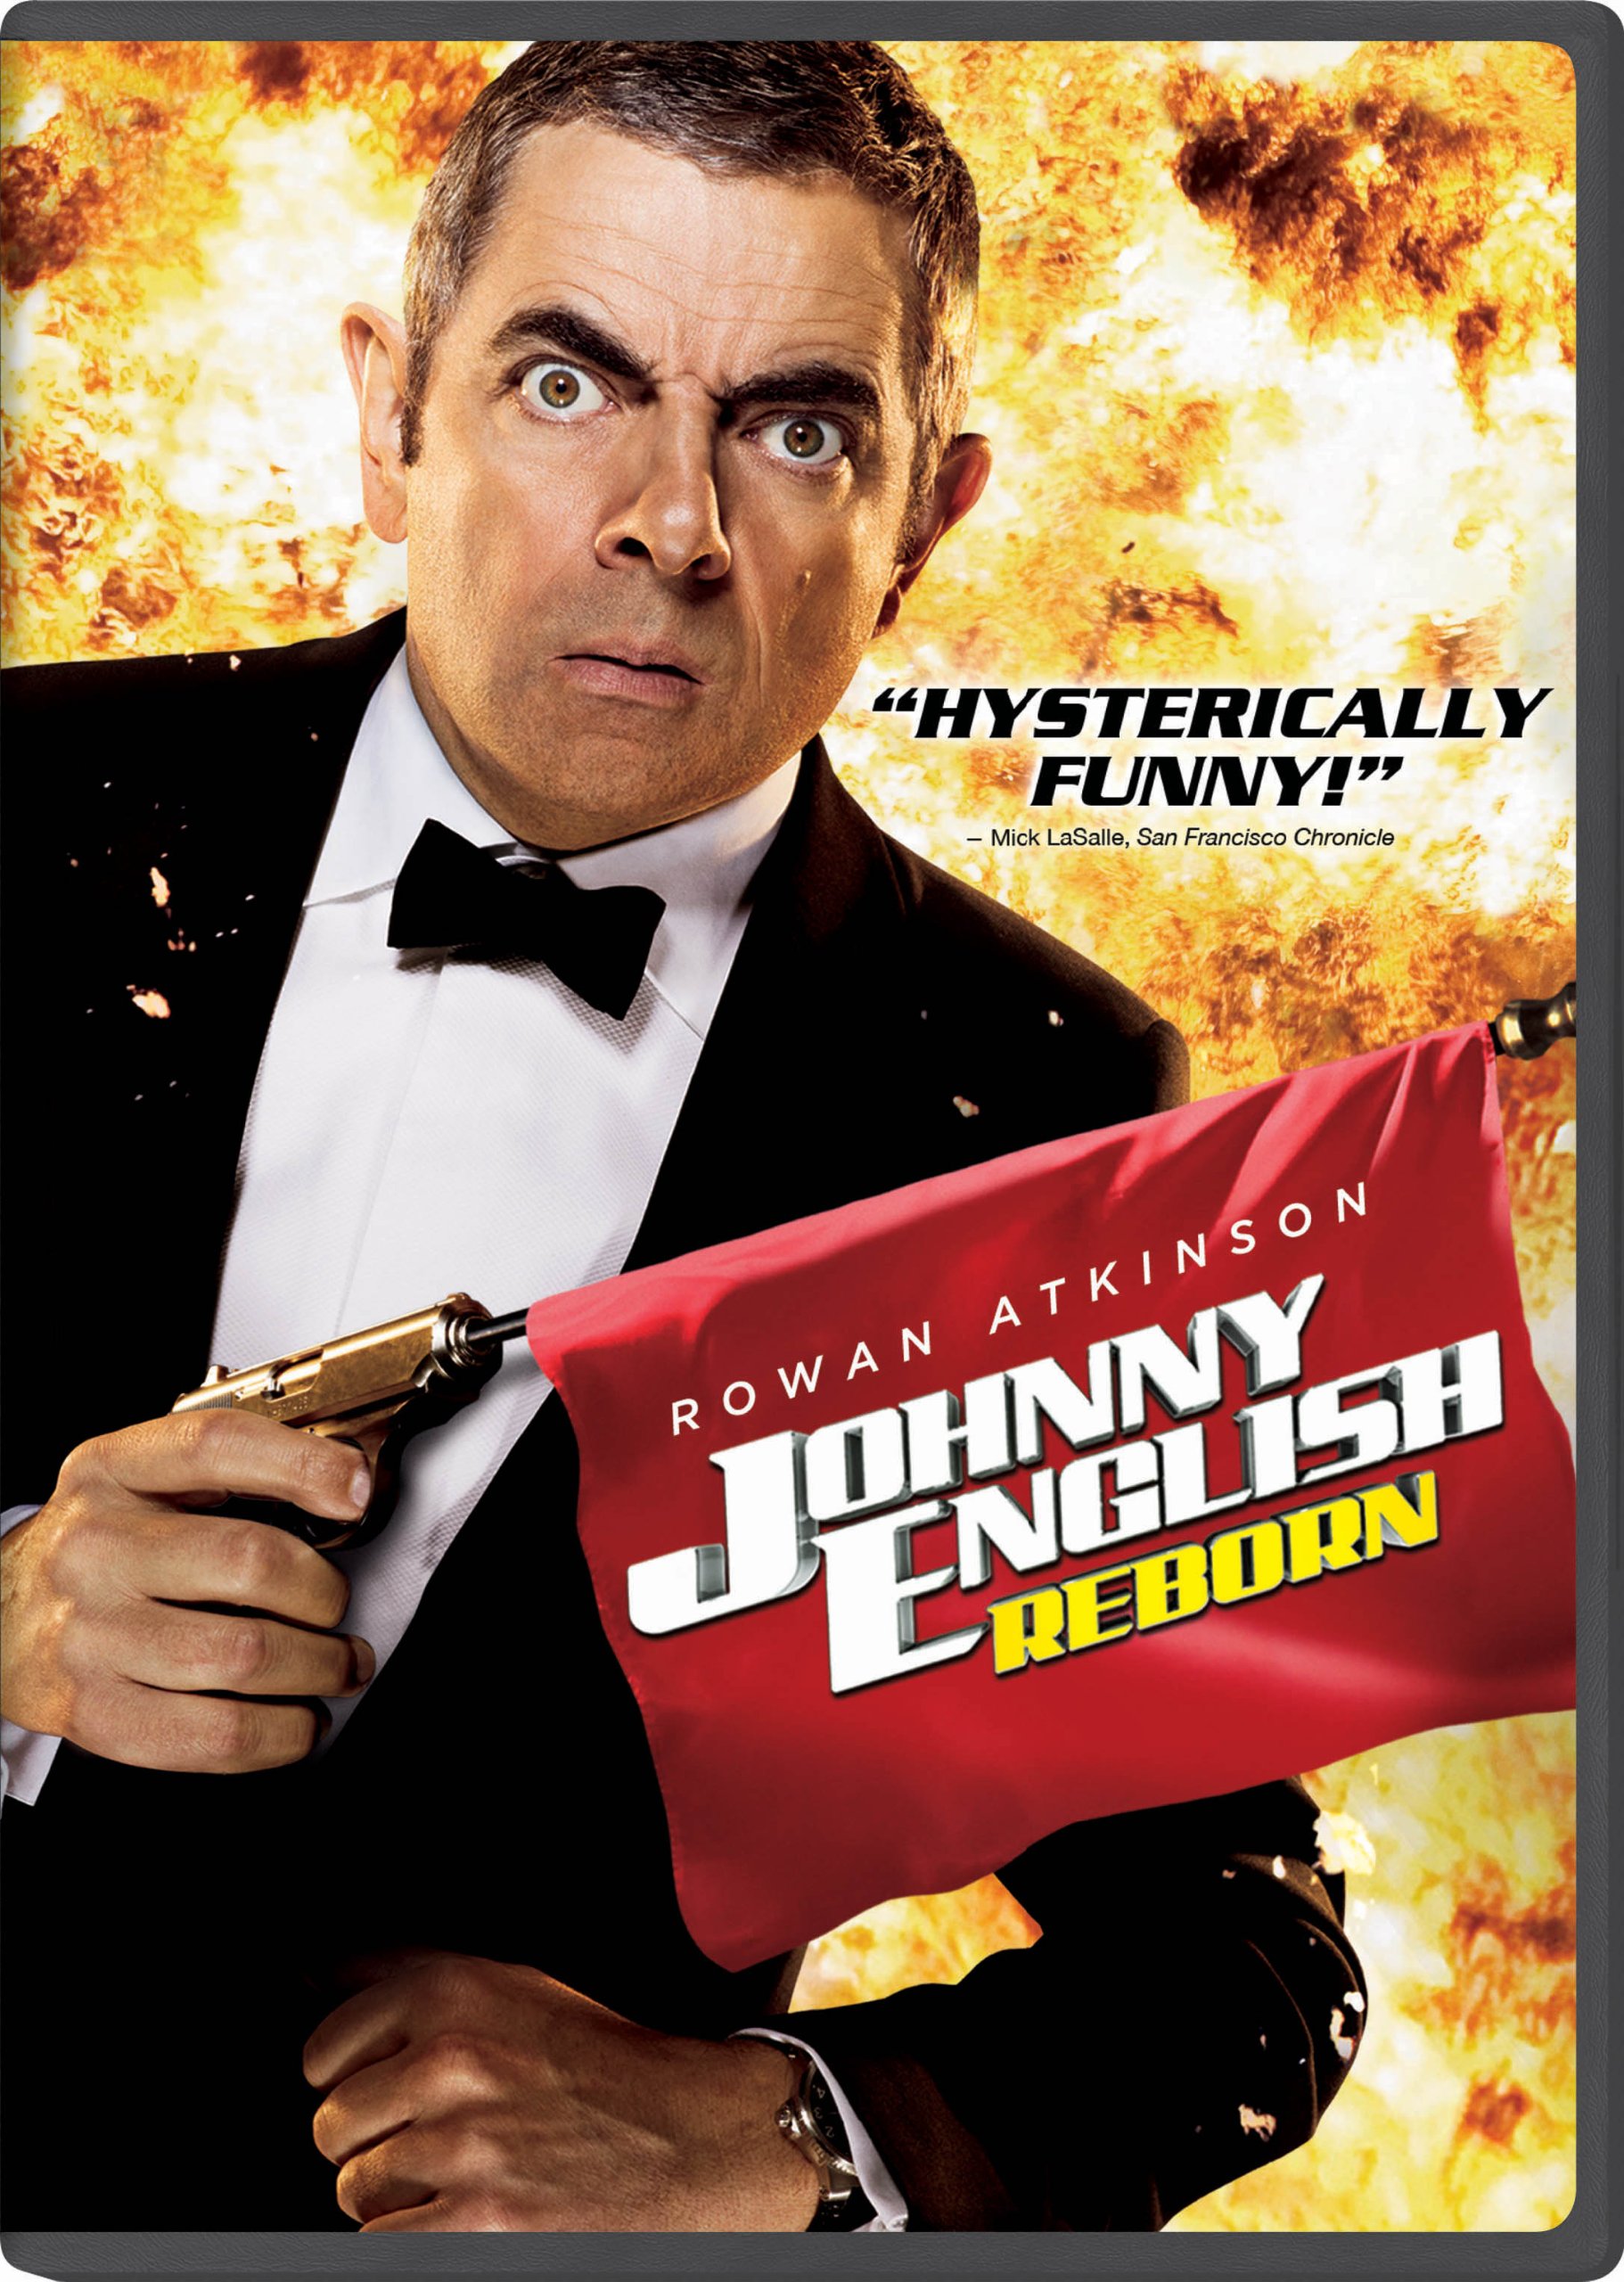 Johnny English Reborn DVD Release Date February 28, 2012